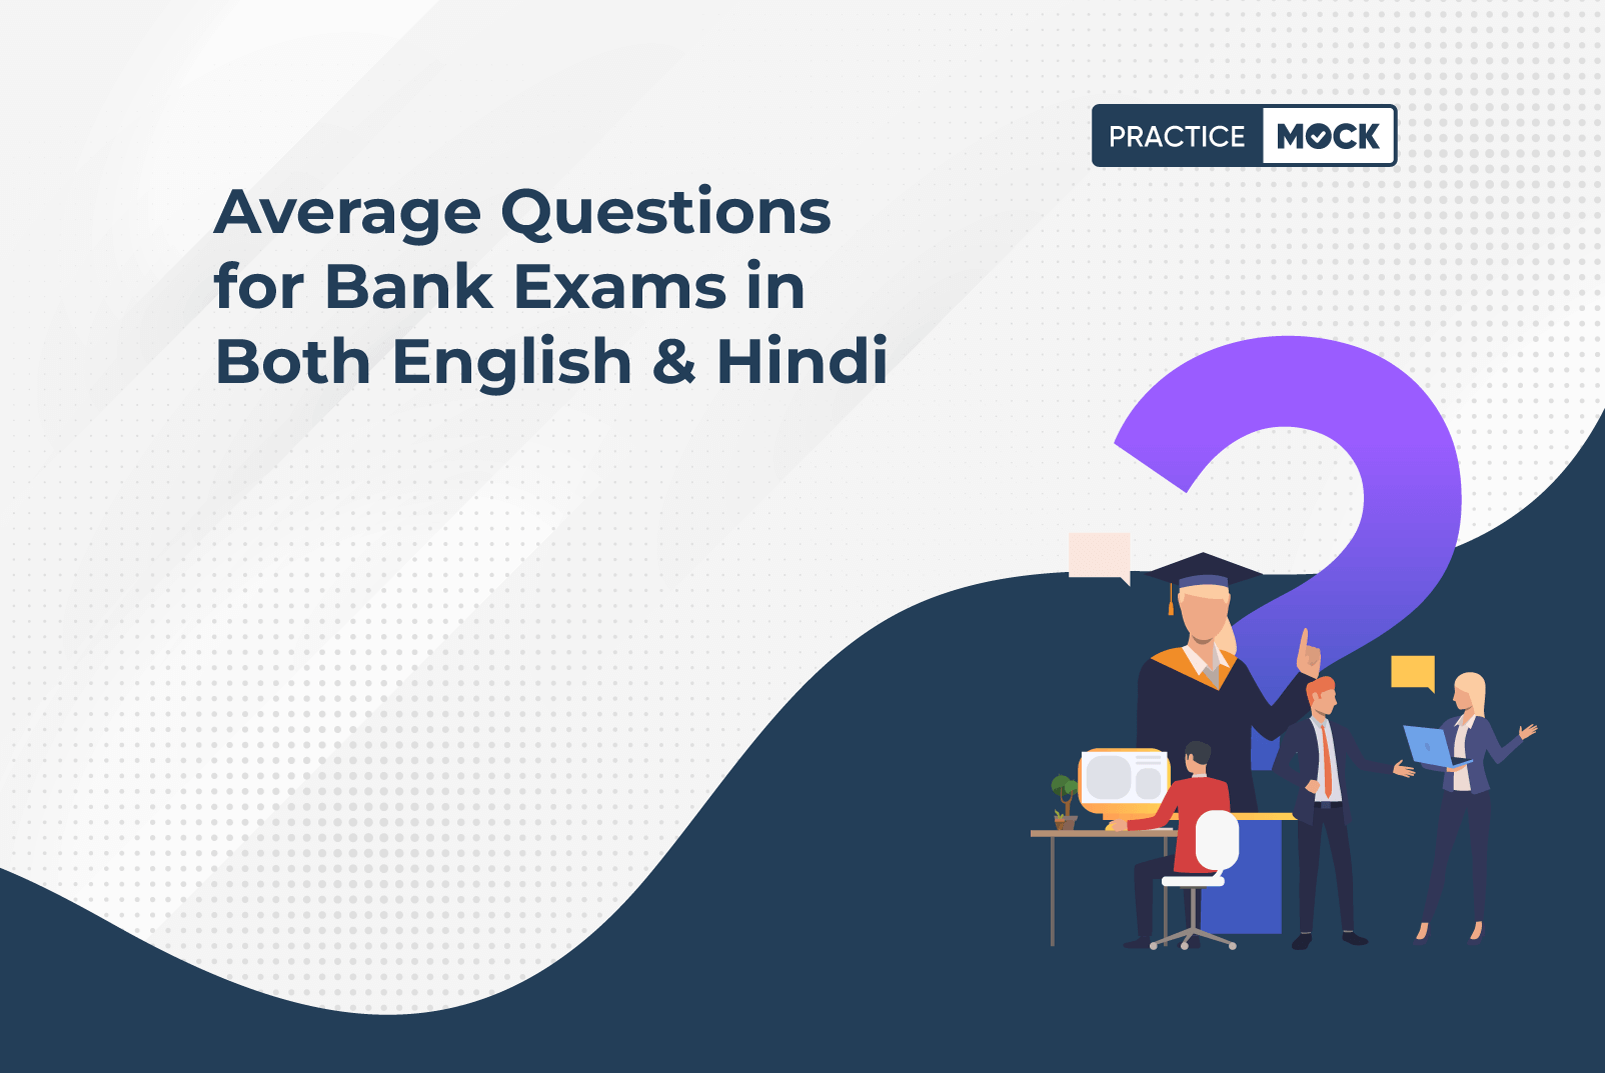 Average Questions for Bank Exams in Both English & Hindi